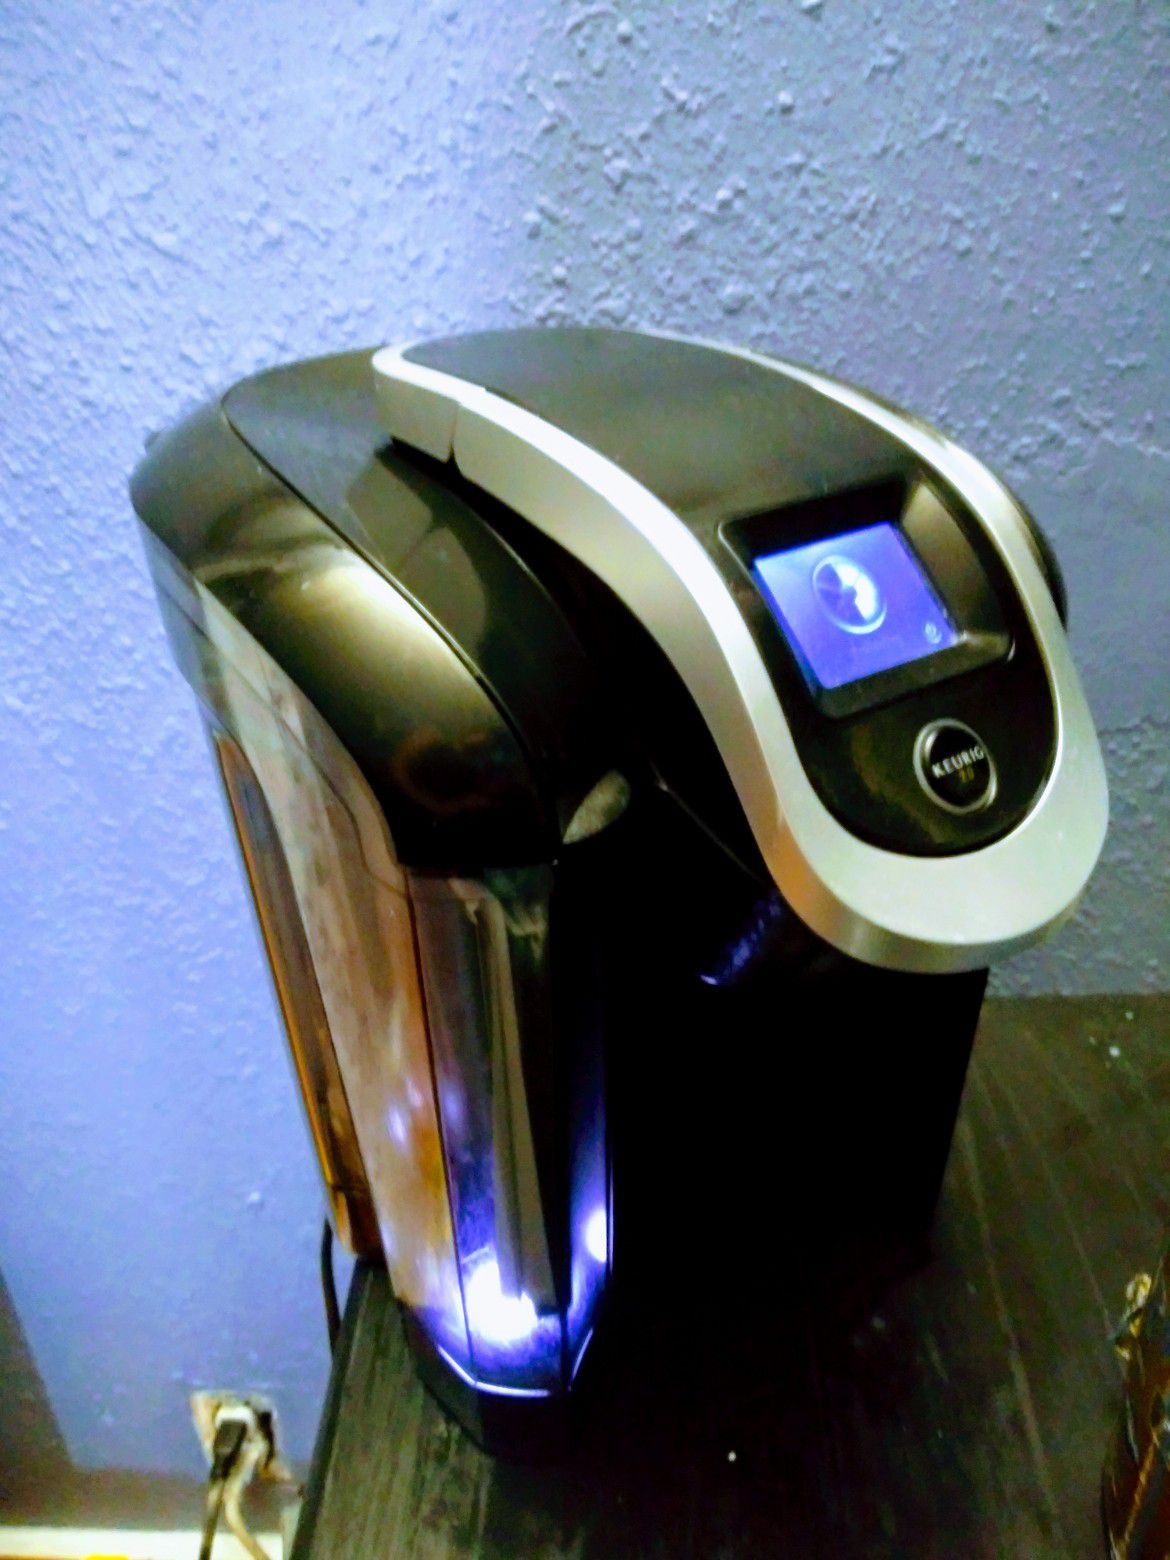 Keurig coffee maker w touch screen